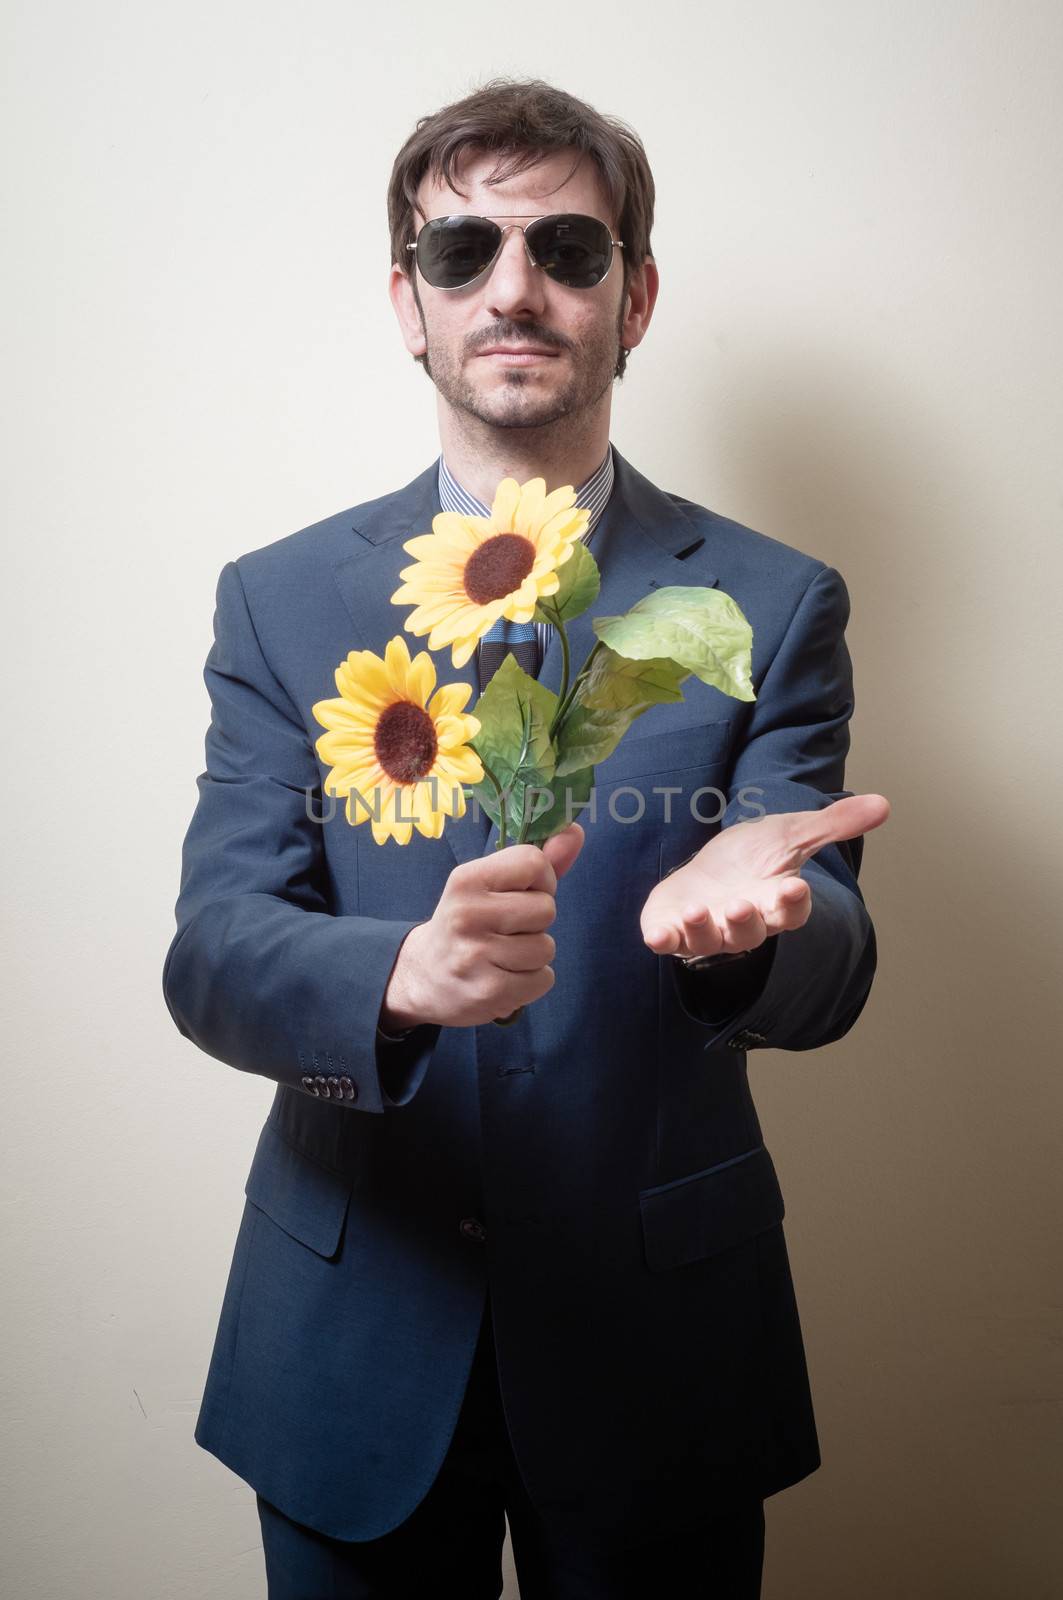 elegant man with daisies on gray background